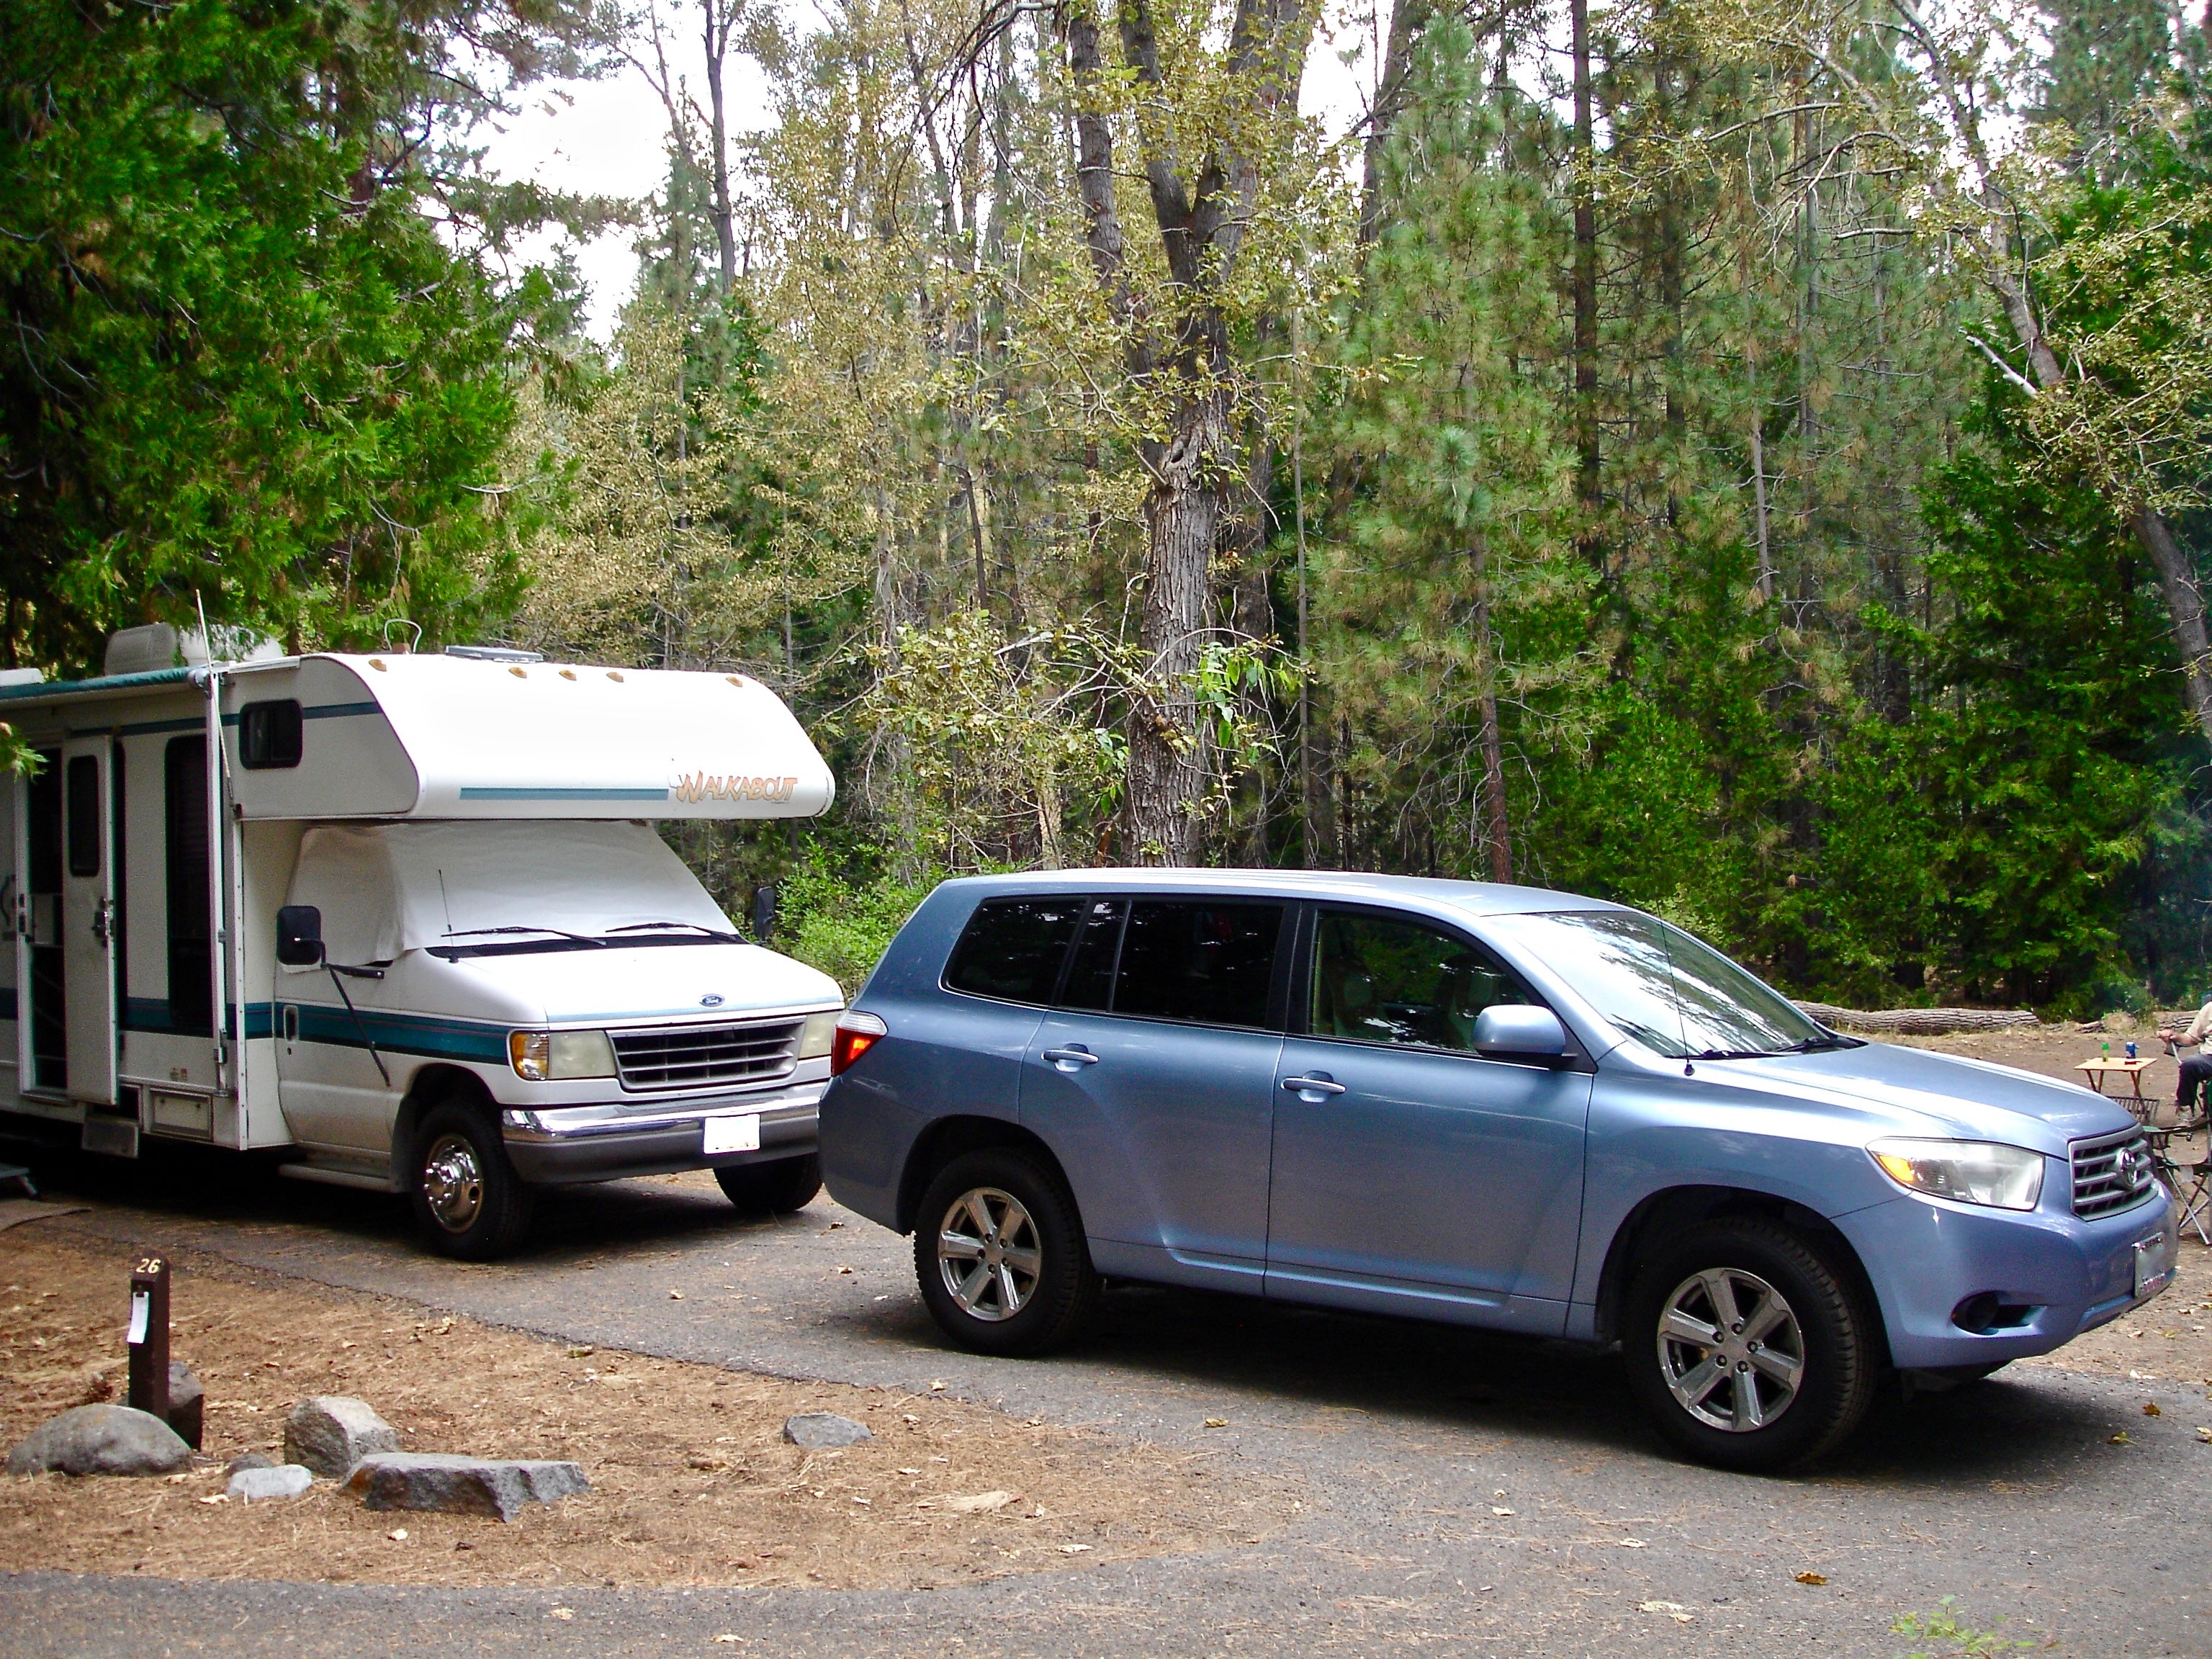 Plenty of room for two vehicles in many of the sites (that's a 29-foot RV).